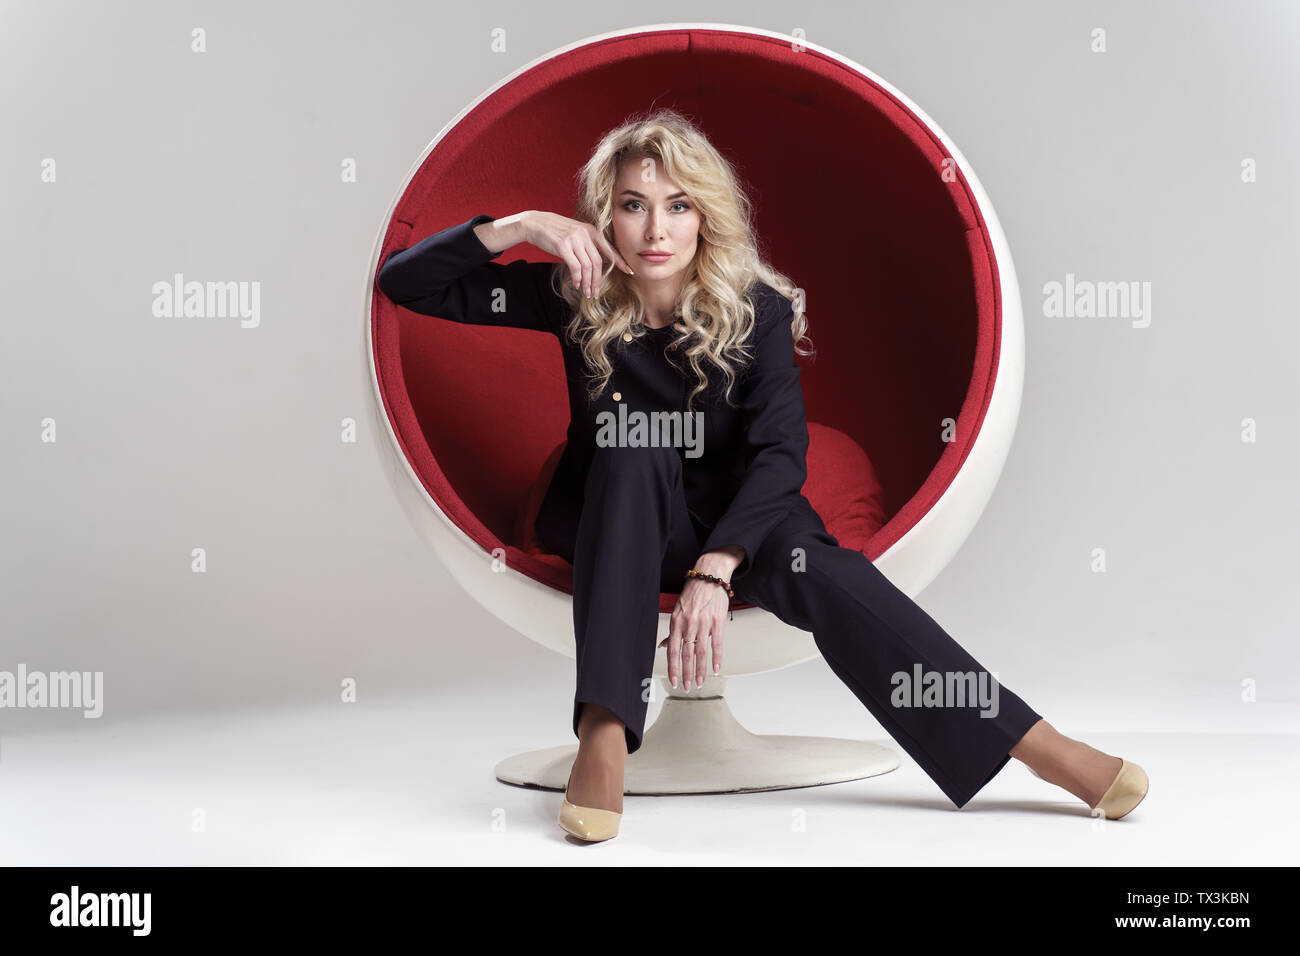 Image of blonde woman with long curly hair in black suit and beige shoes looking in camera while sitting in round chair isolated on white background Stock Photo